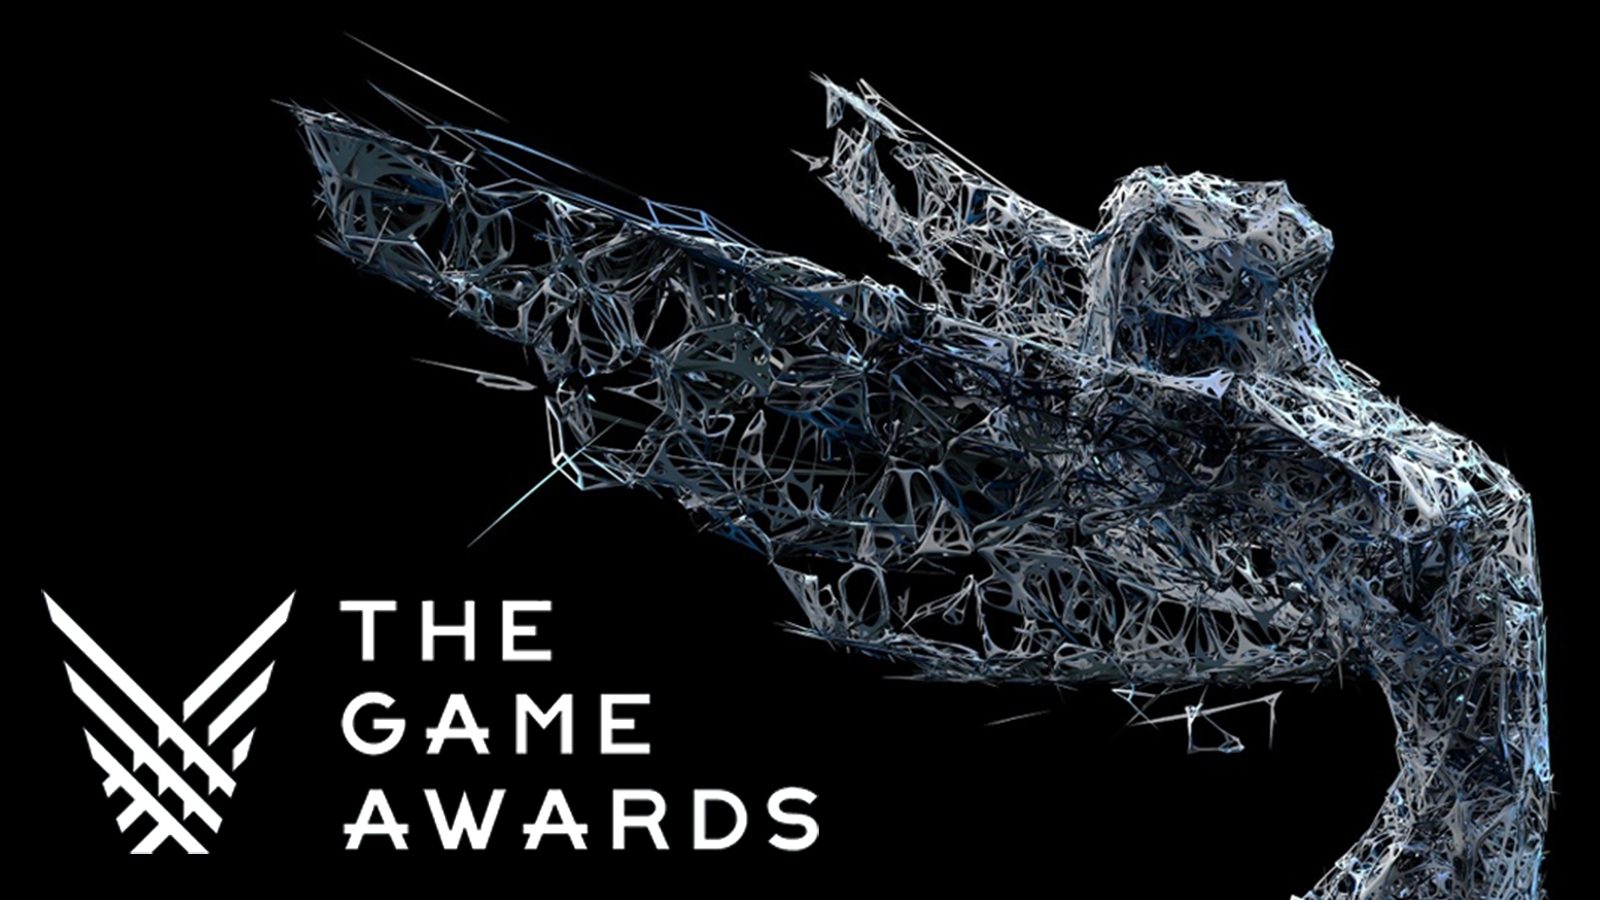 Game Awards 2018 nominees: God of War, Red Dead Redemption 2 and more -  Polygon